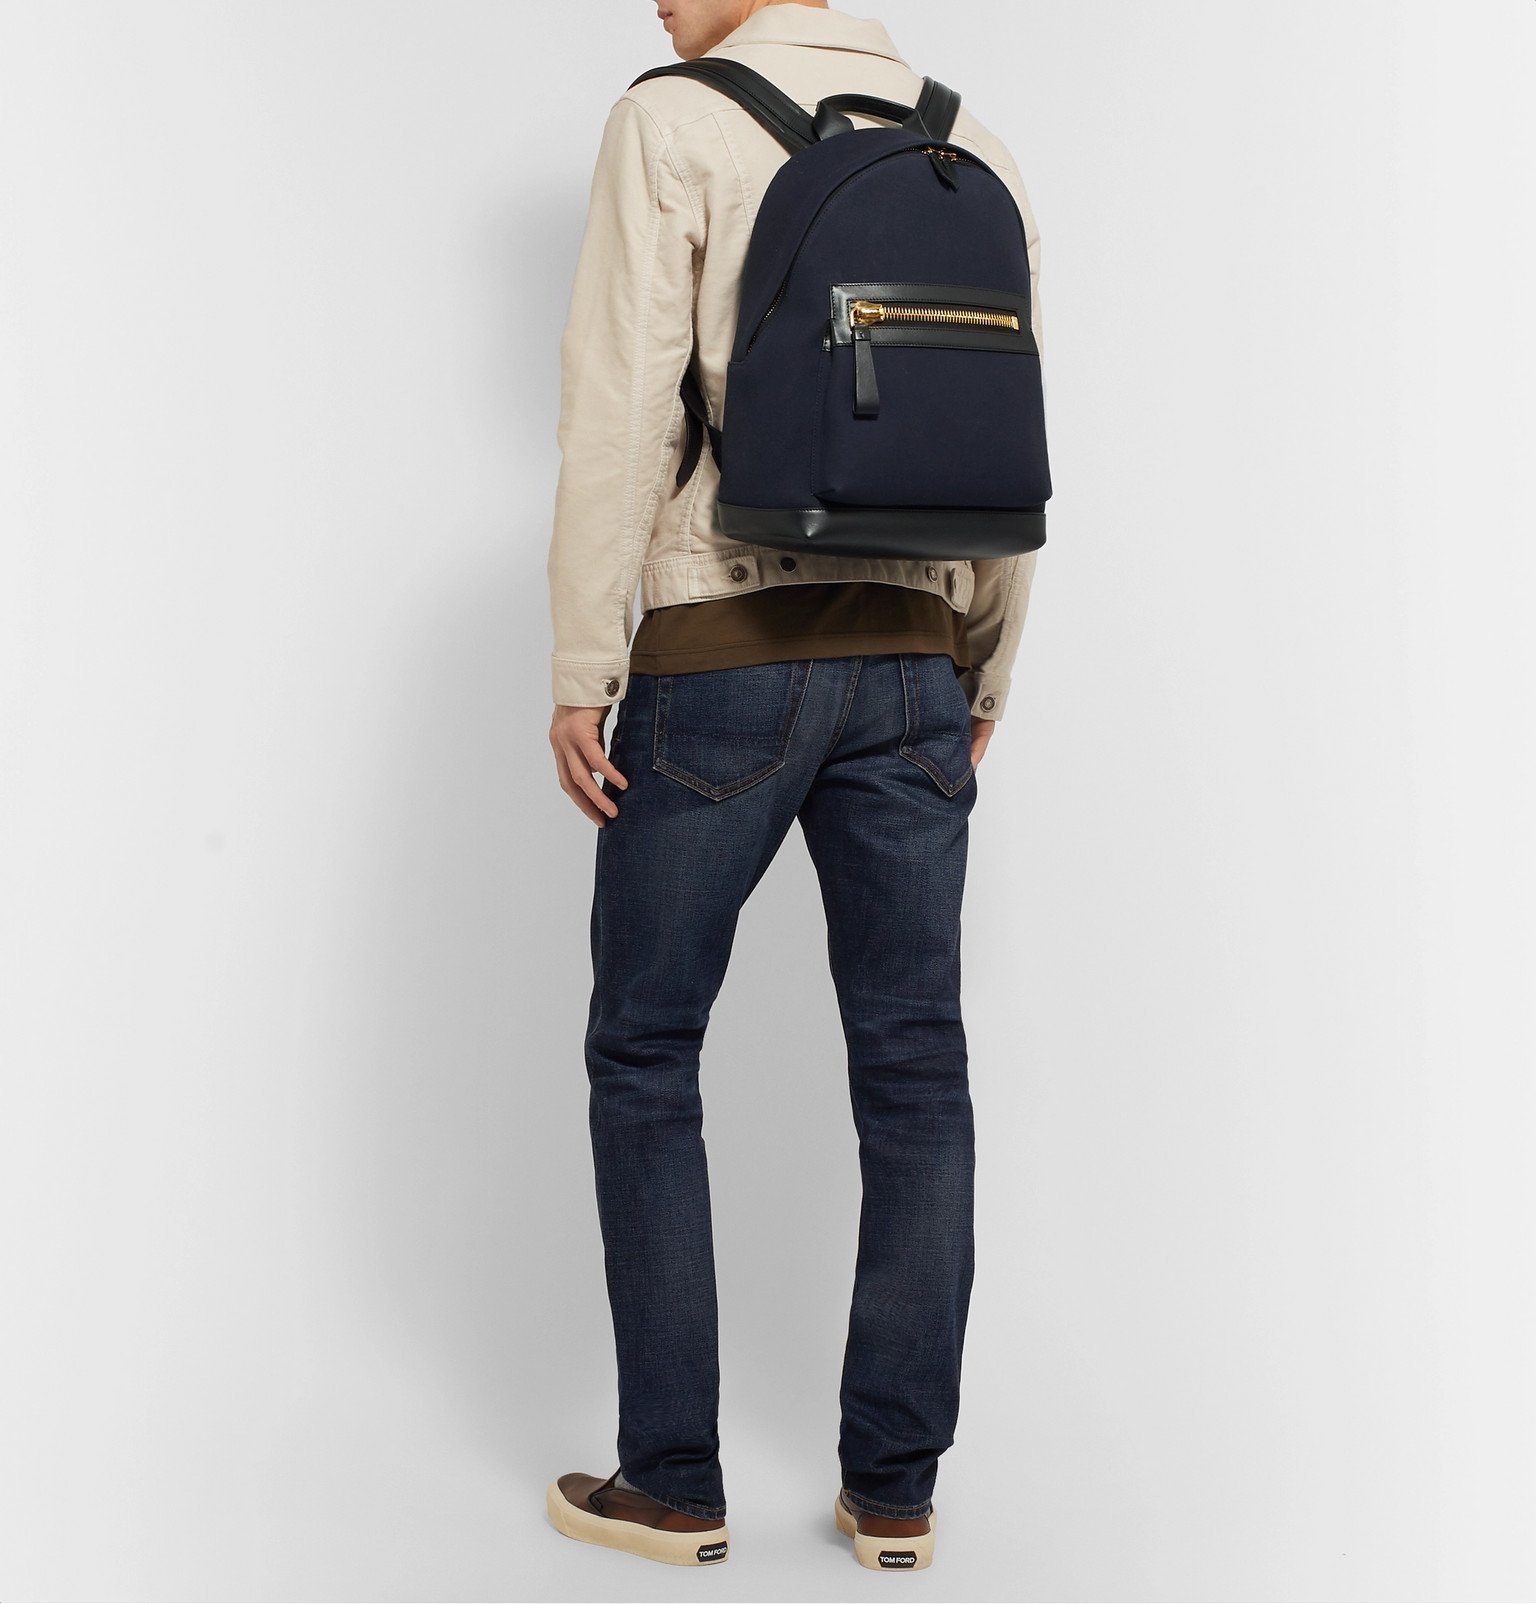 TOM FORD - Canvas and Leather Backpack - Blue TOM FORD